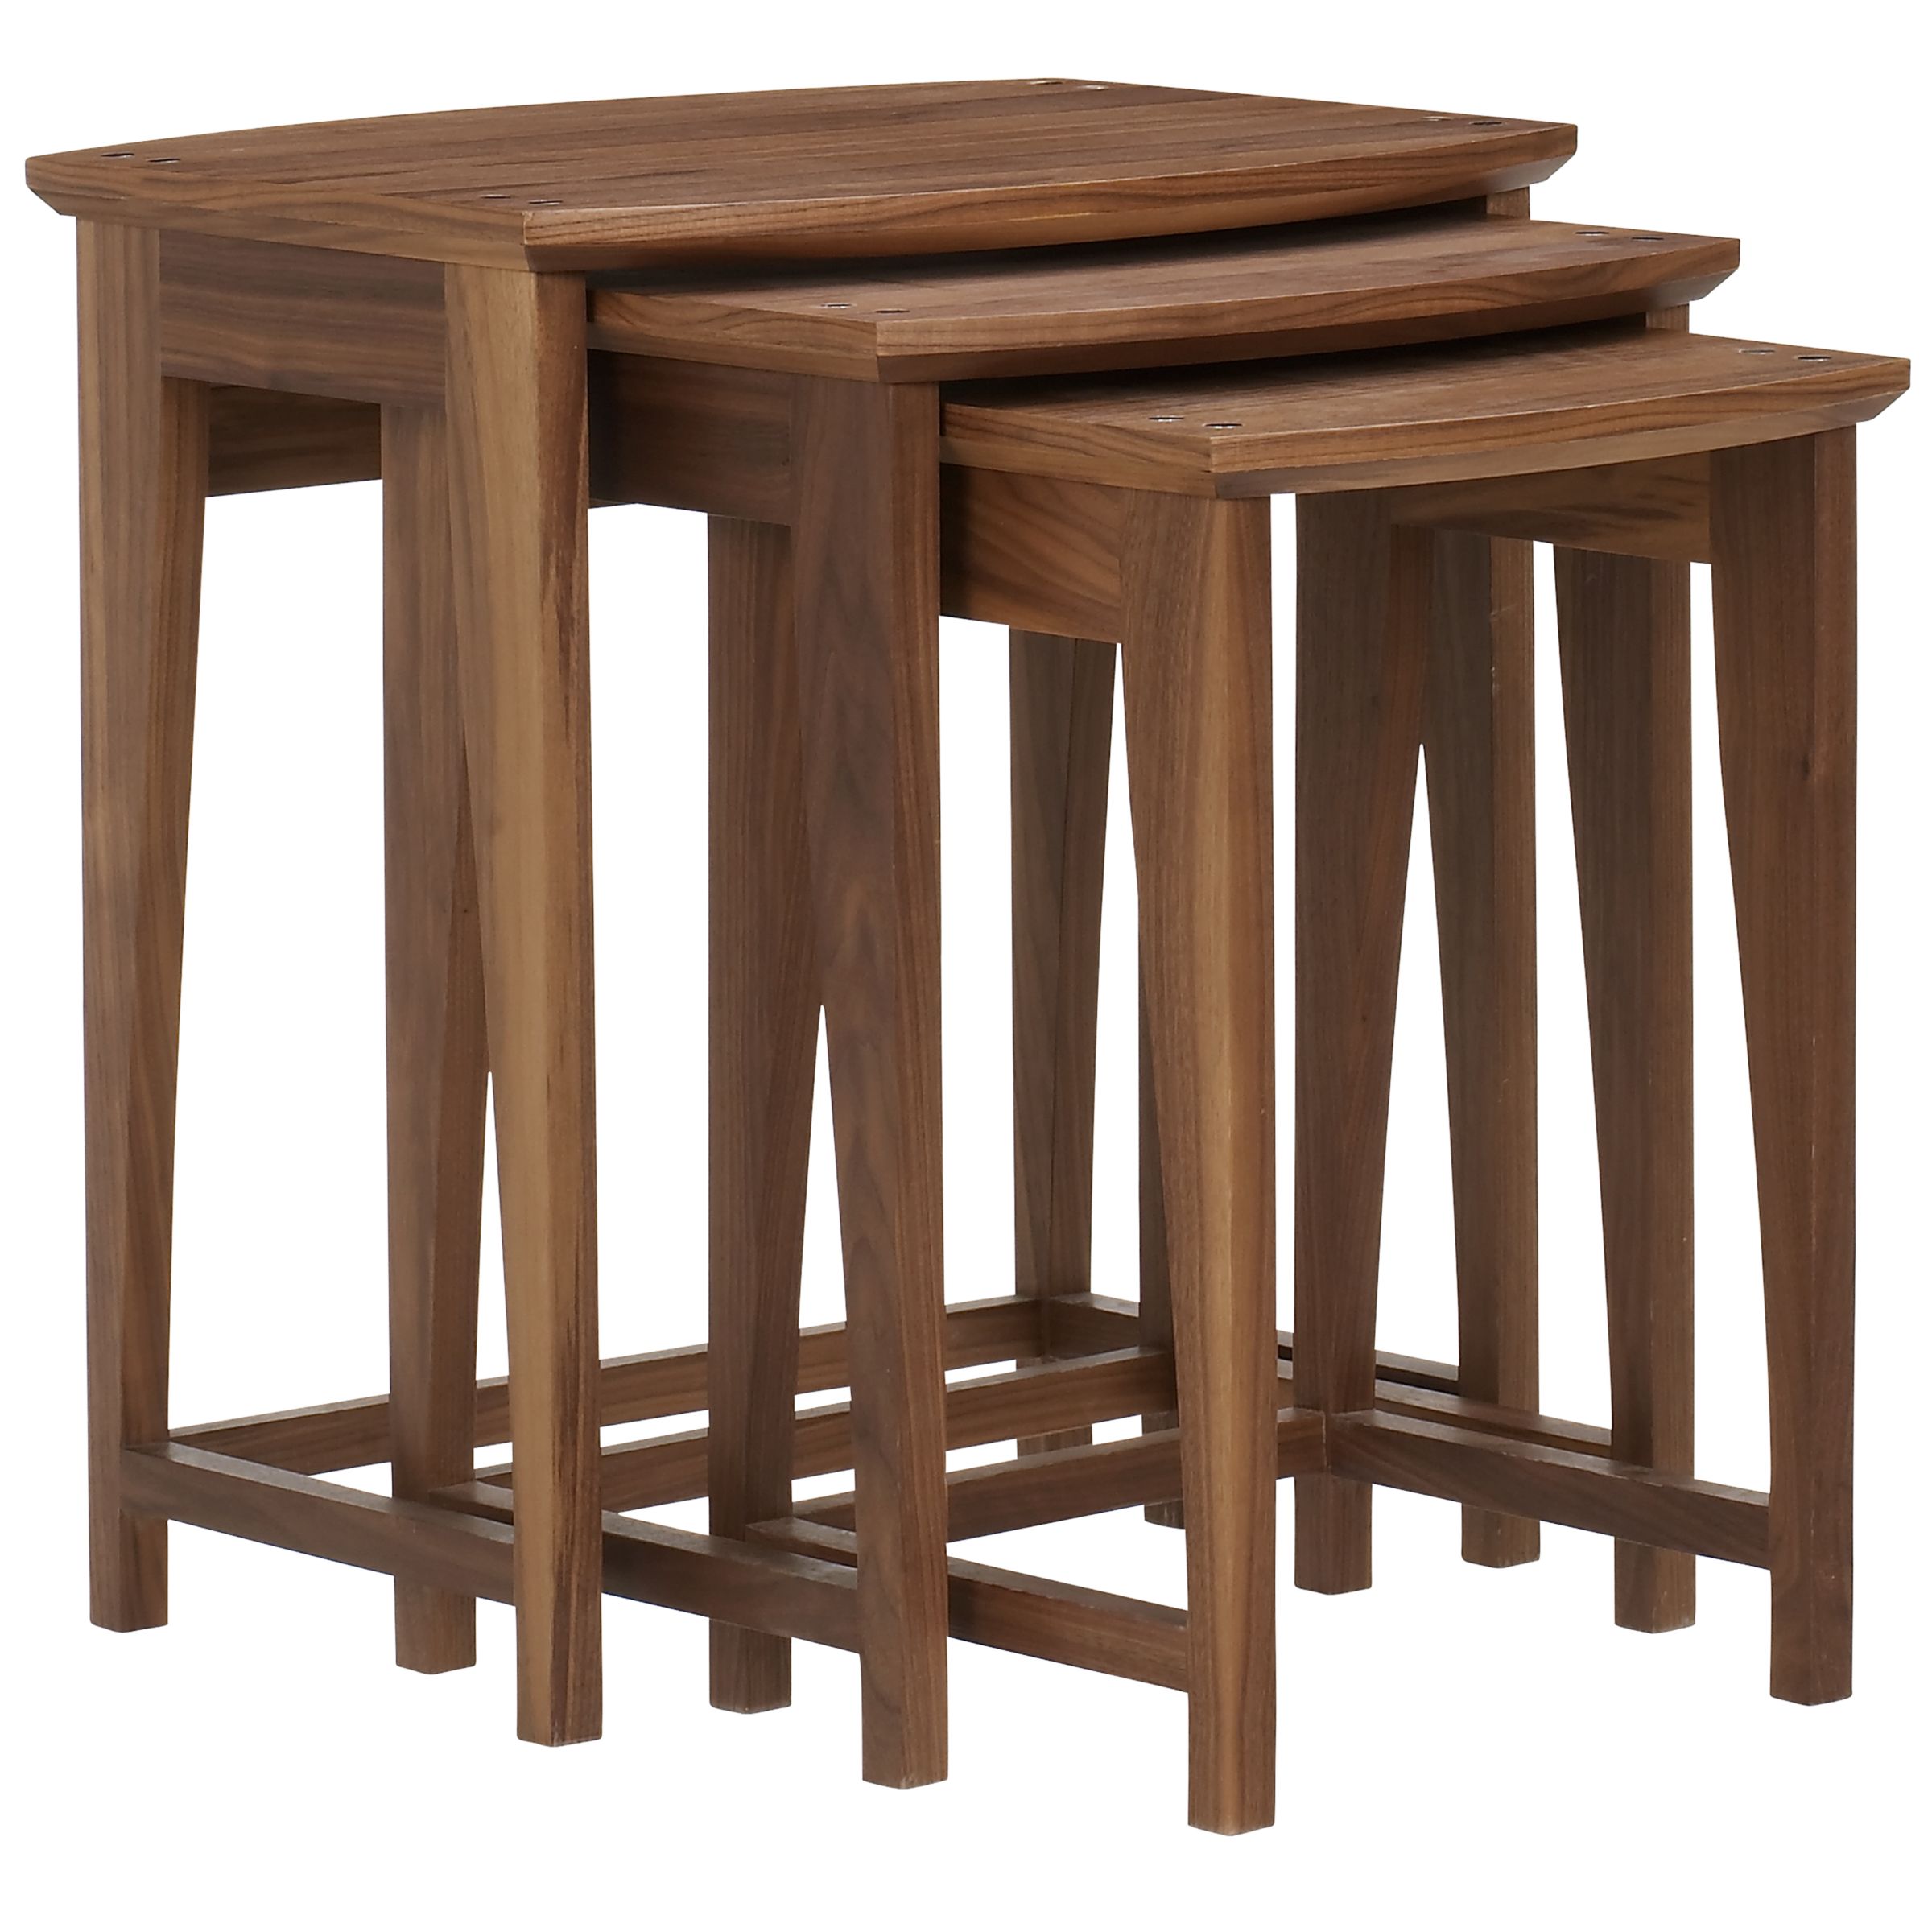 Nick Munro Nest of 3 Tables